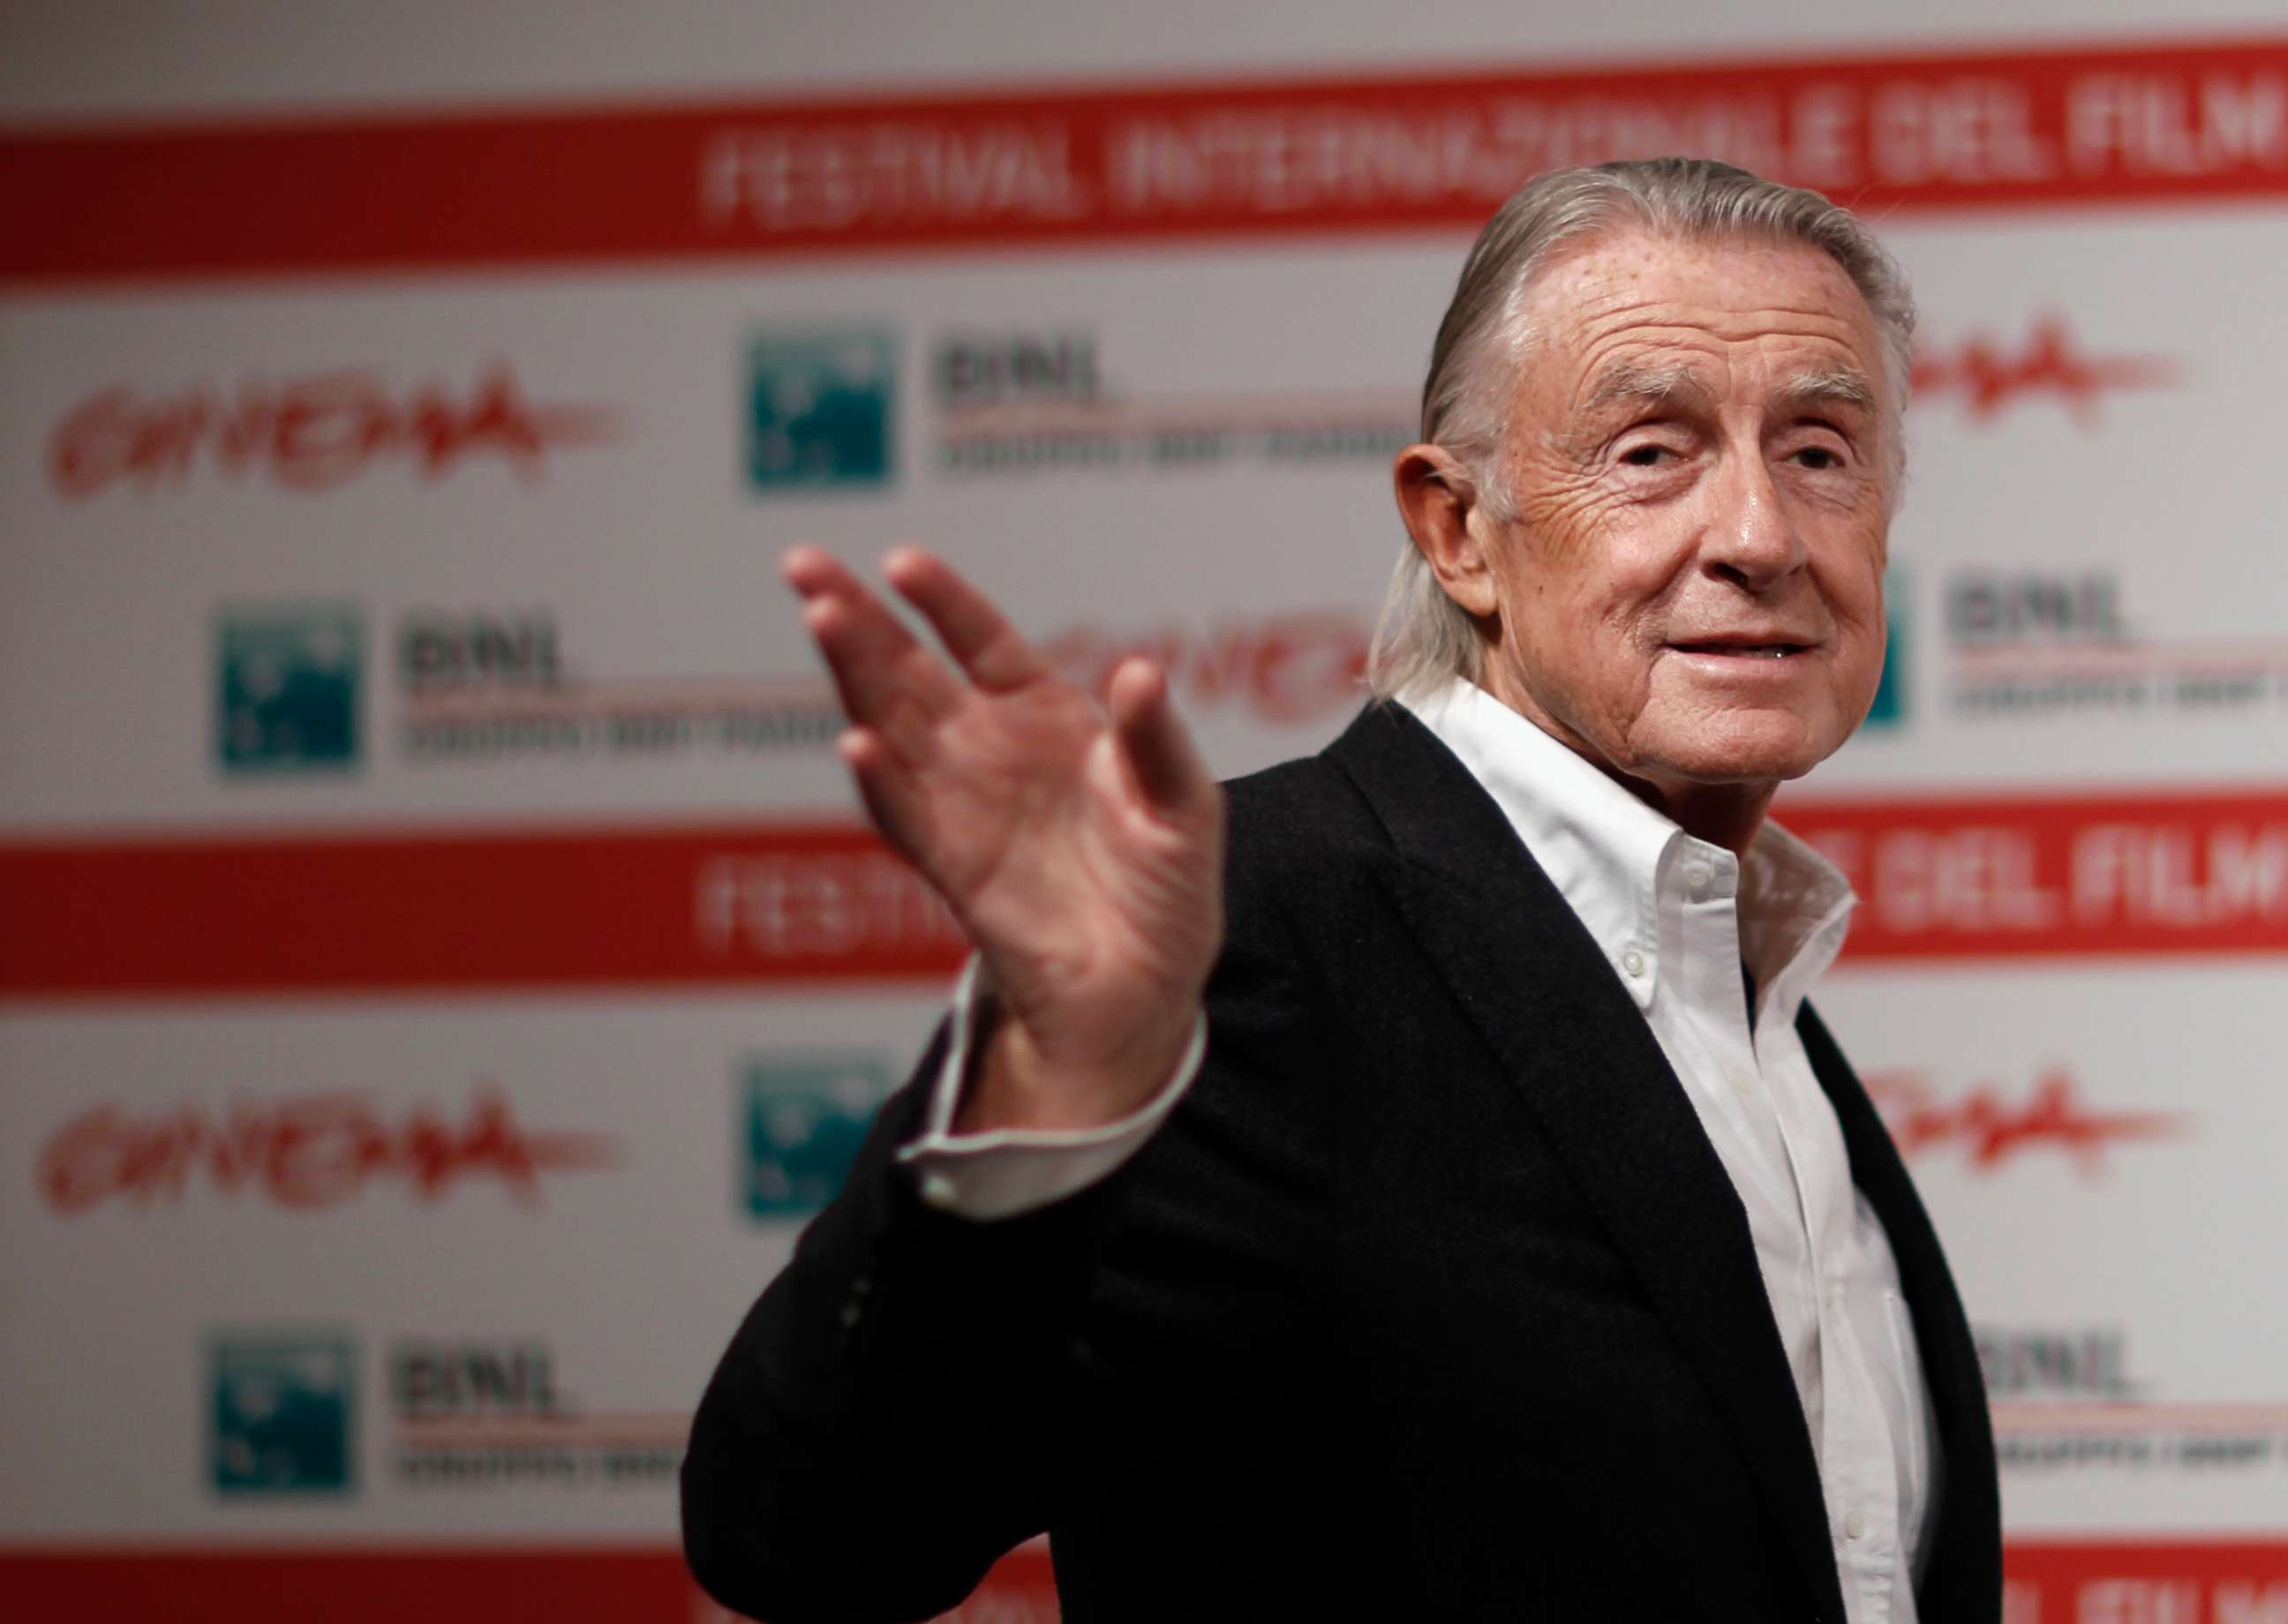 PHOTO: Director Joel Schumacher waves as he poses during a photo call at a film festival in Rome, Nov. 3, 2011.